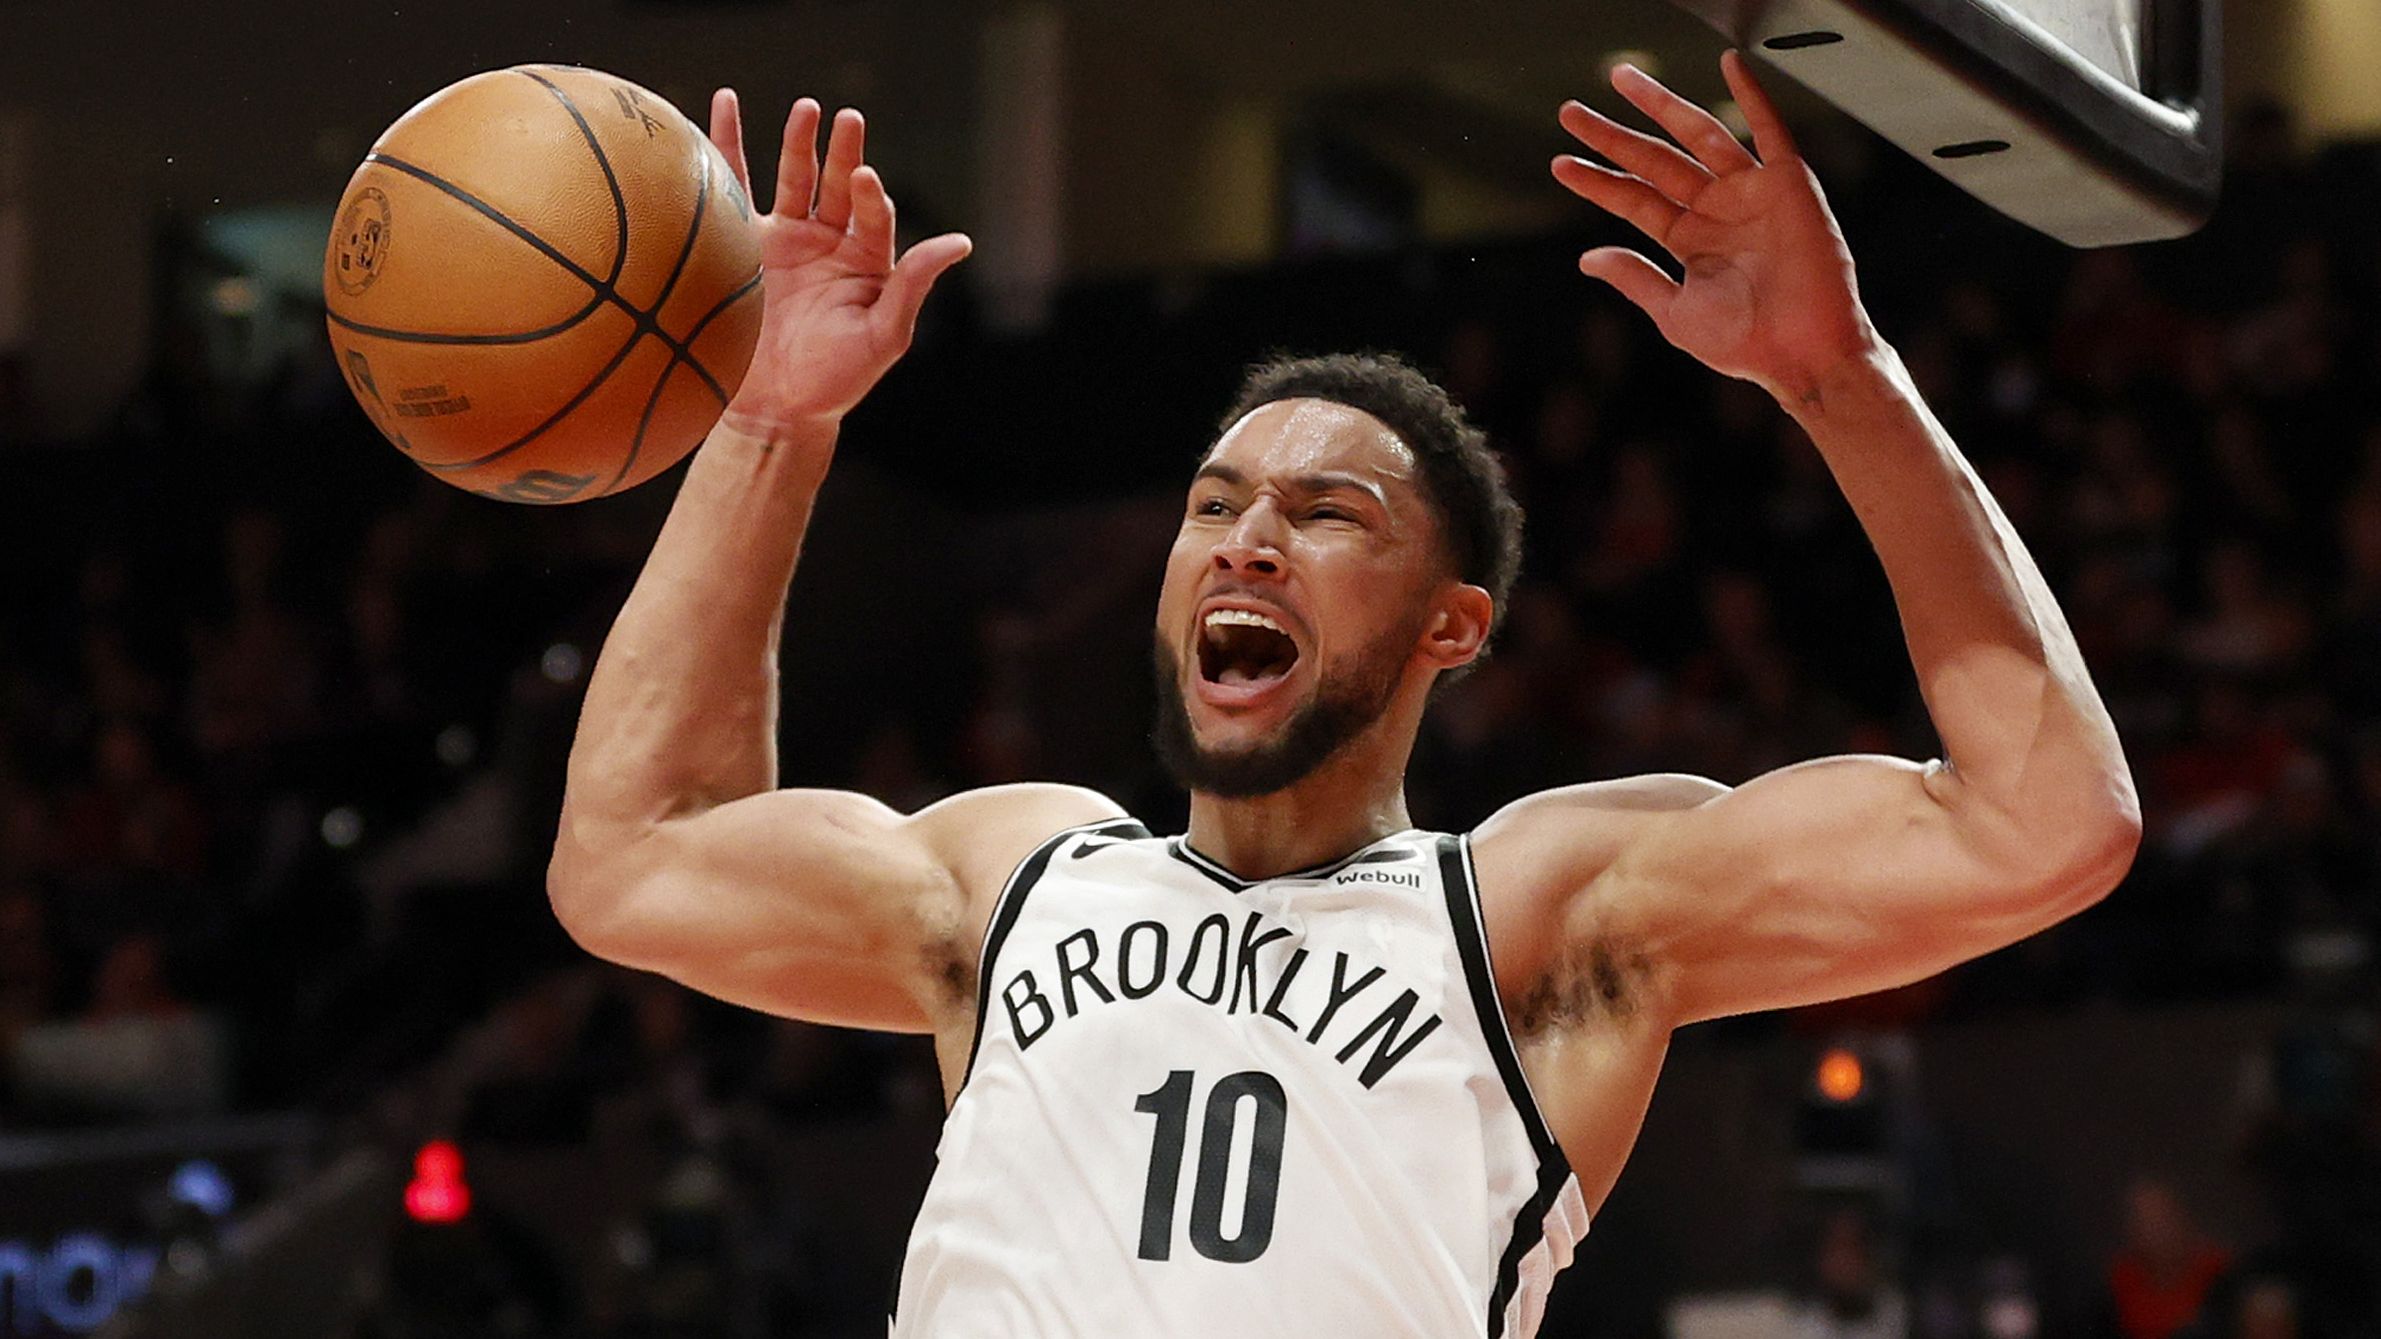 PORTLAND, OREGON - NOVEMBER 17: Ben Simmons #10 of the Brooklyn Nets dunks during the third quarter against the Portland Trail Blazers at Moda Center on November 17, 2022 in Portland, Oregon. NOTE TO USER: User expressly acknowledges and agrees that, by downloading and or using this photograph, User is consenting to the terms and conditions of the Getty Images License Agreement. (Photo by Steph Chambers/Getty Images)